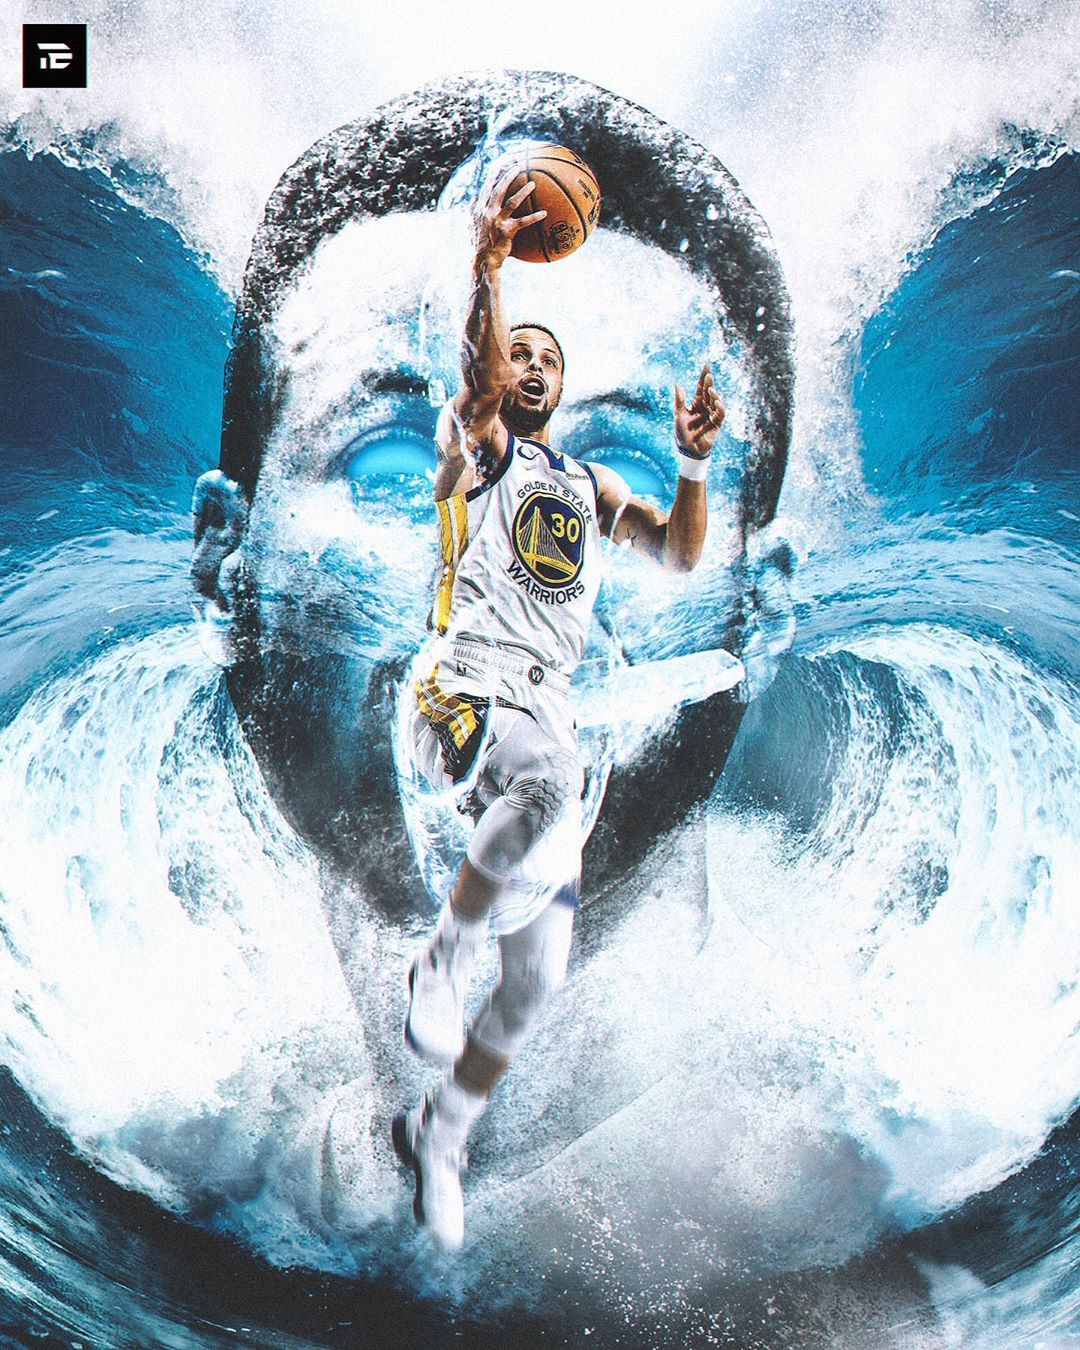 Image may contain: 1 person, water and outdoor. Stephen curry wallpaper, Curry wallpaper, Nba wallpaper stephen curry